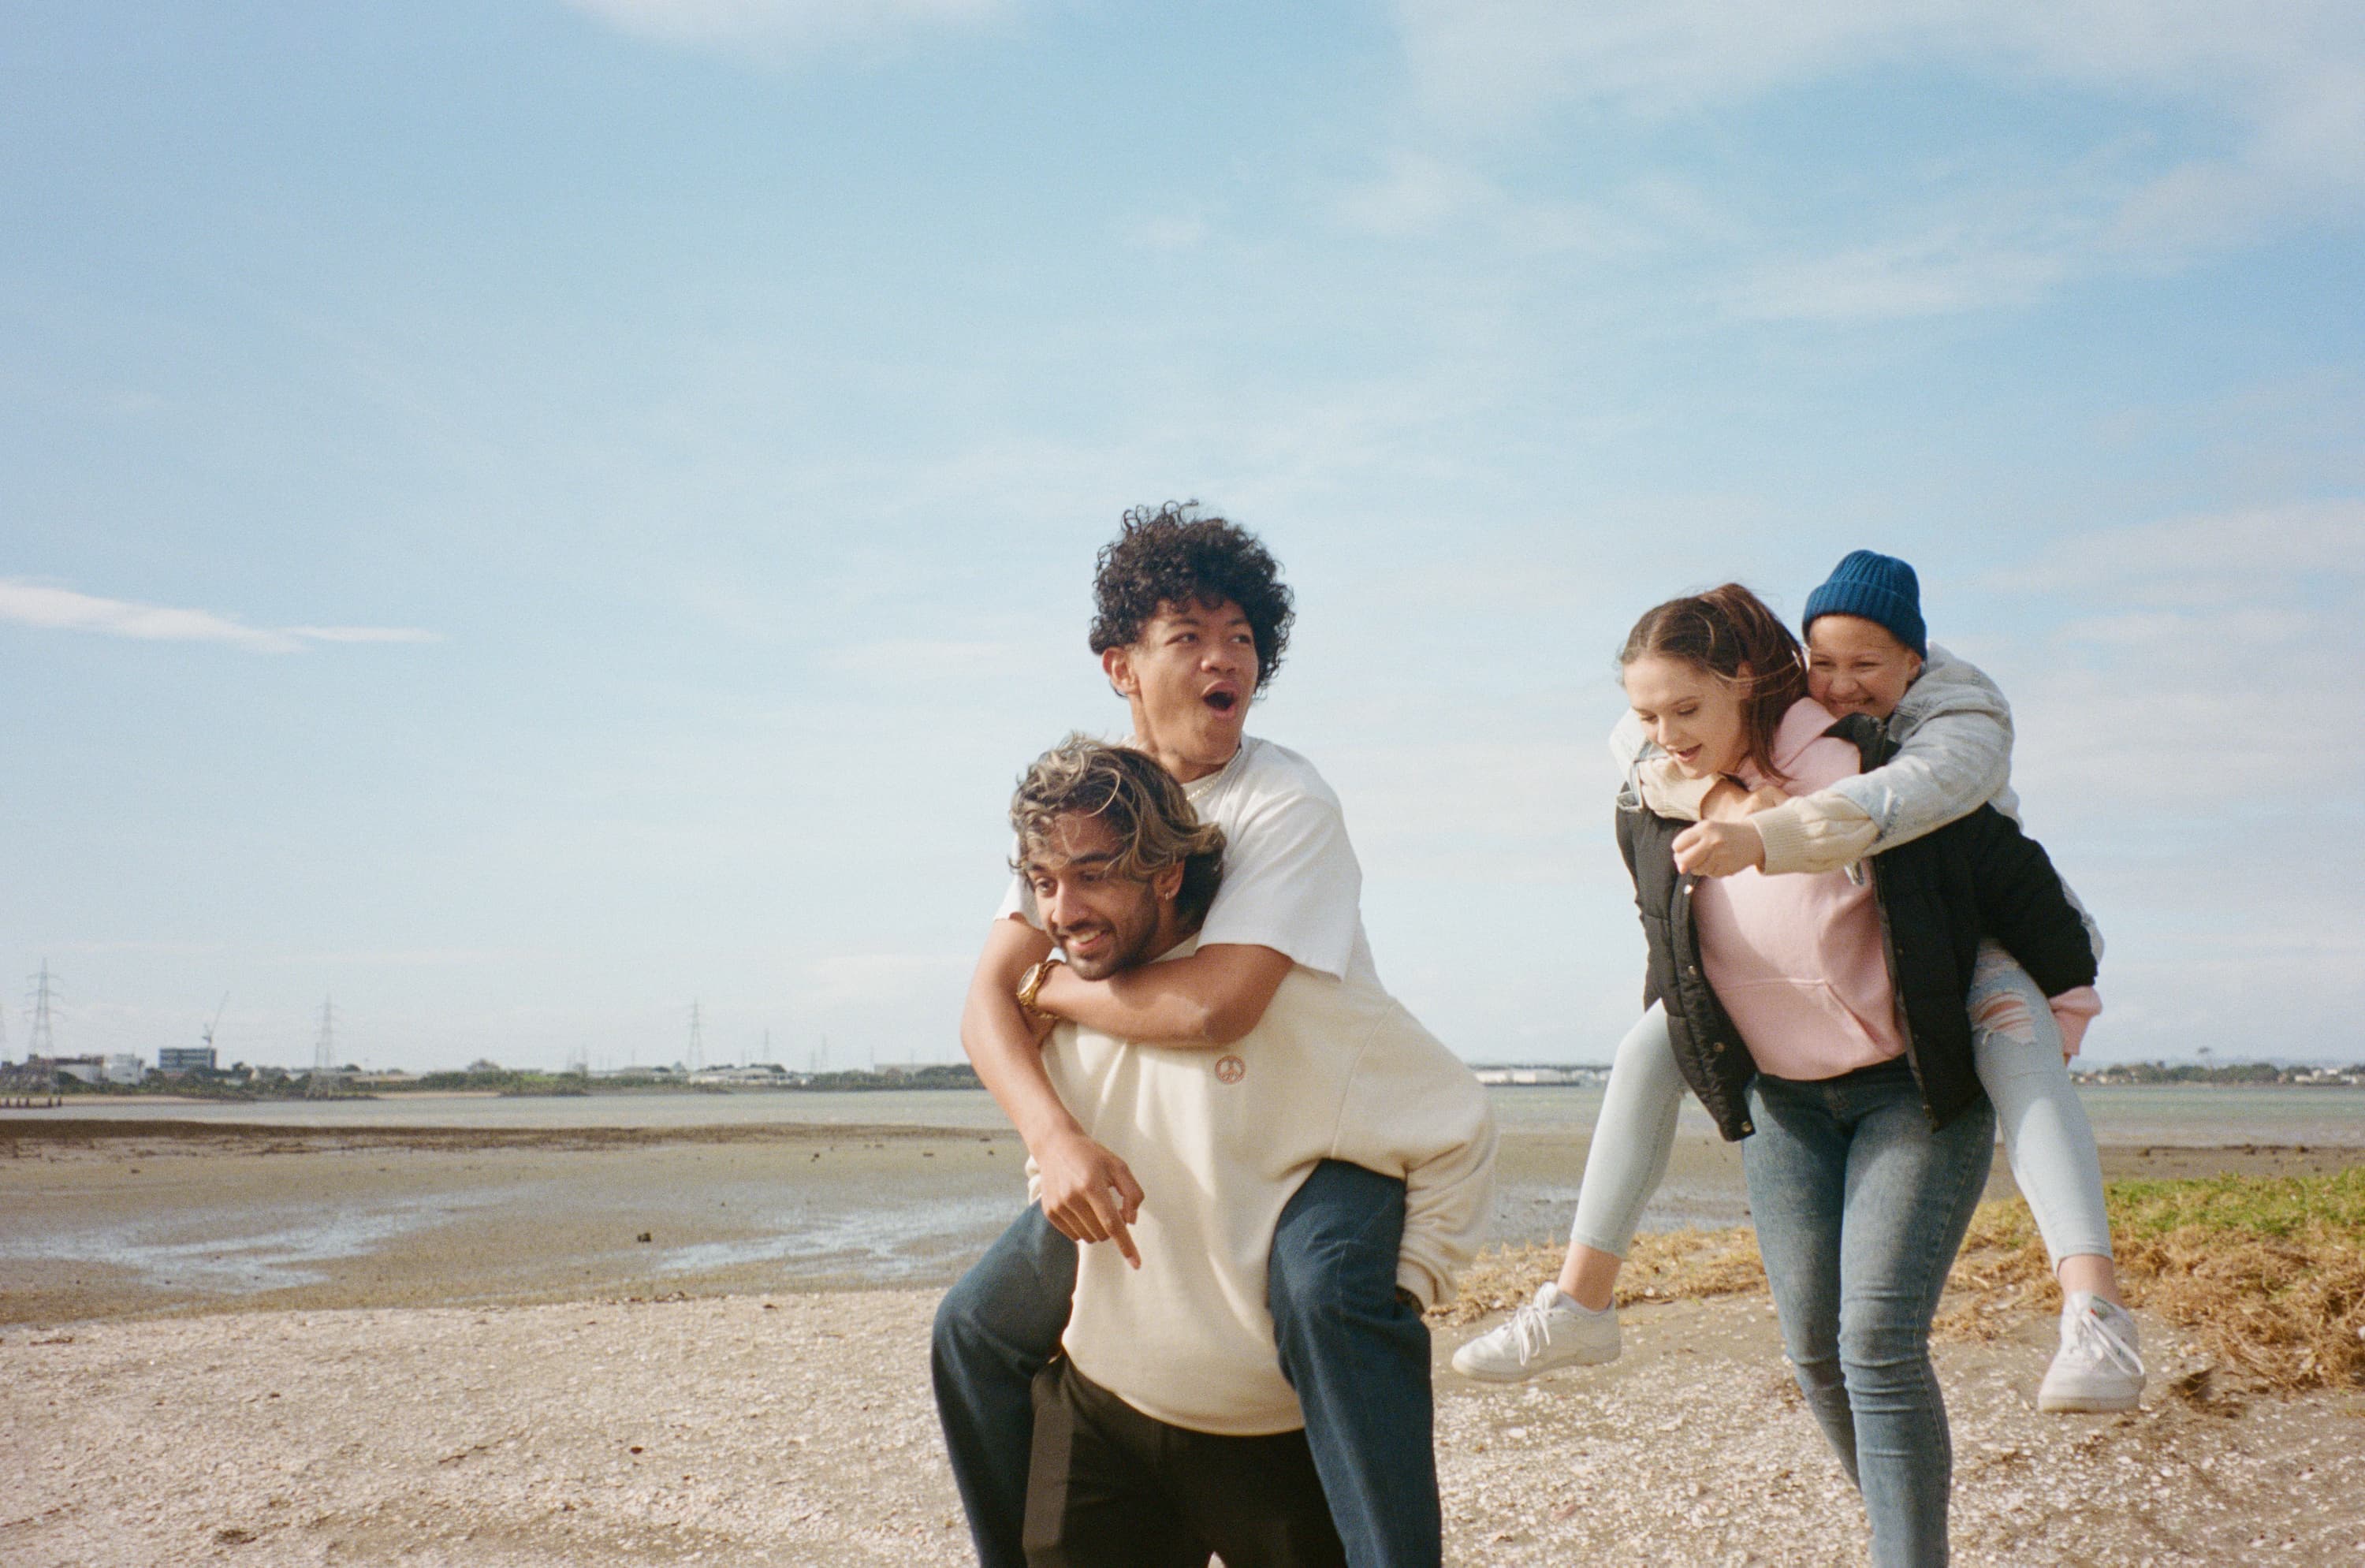 four young people giving each other piggy backs at the beach